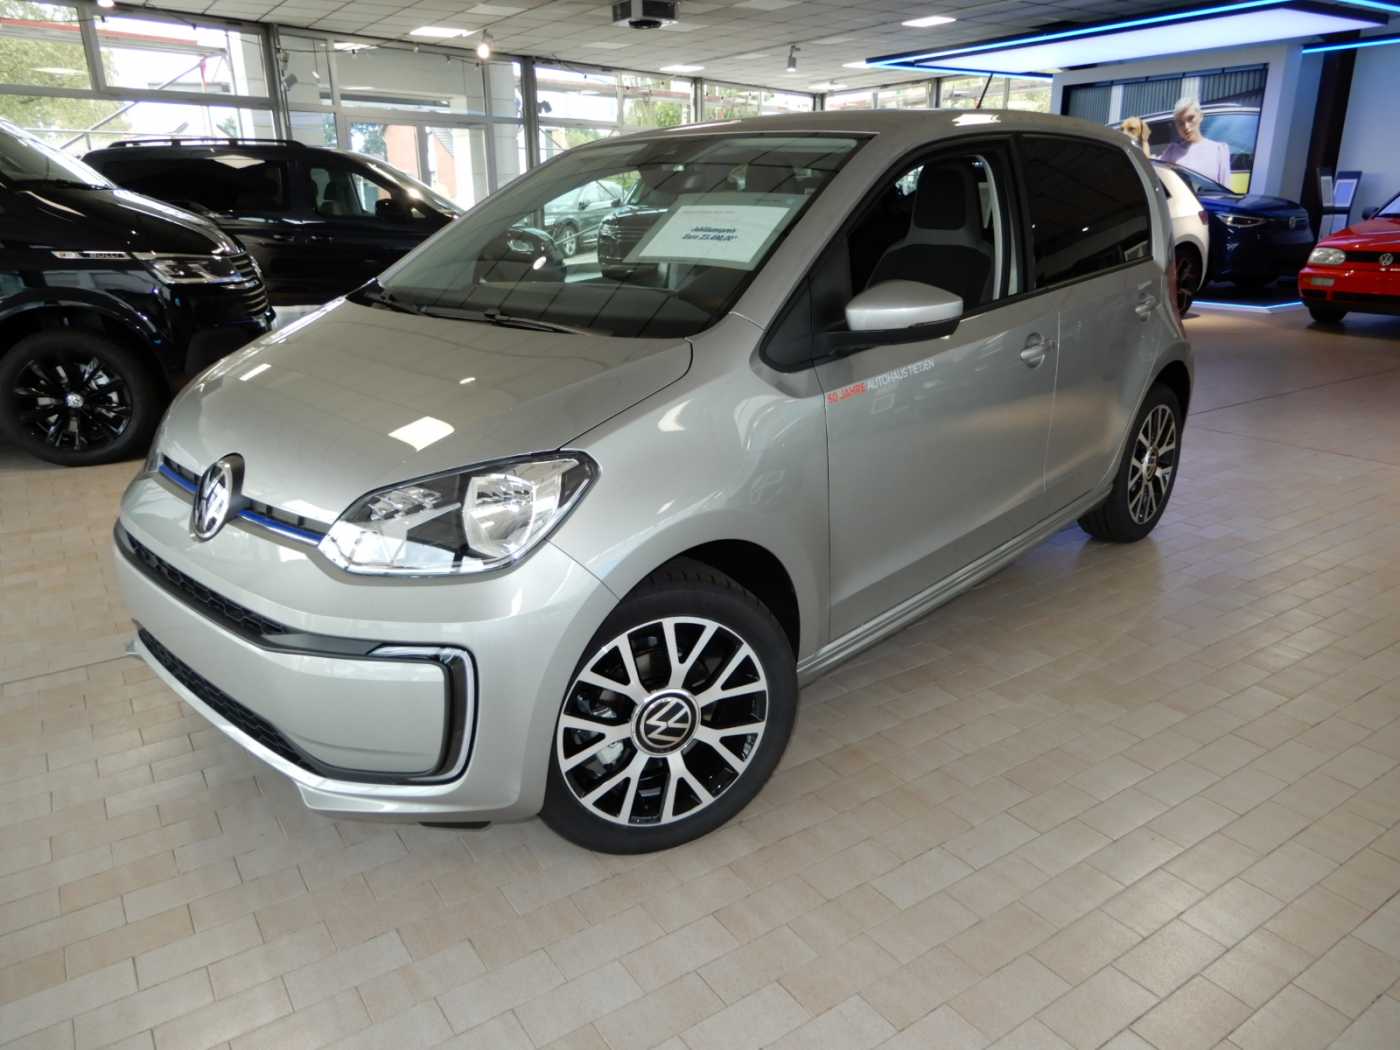 Volkswagen up e-up e-up Edition